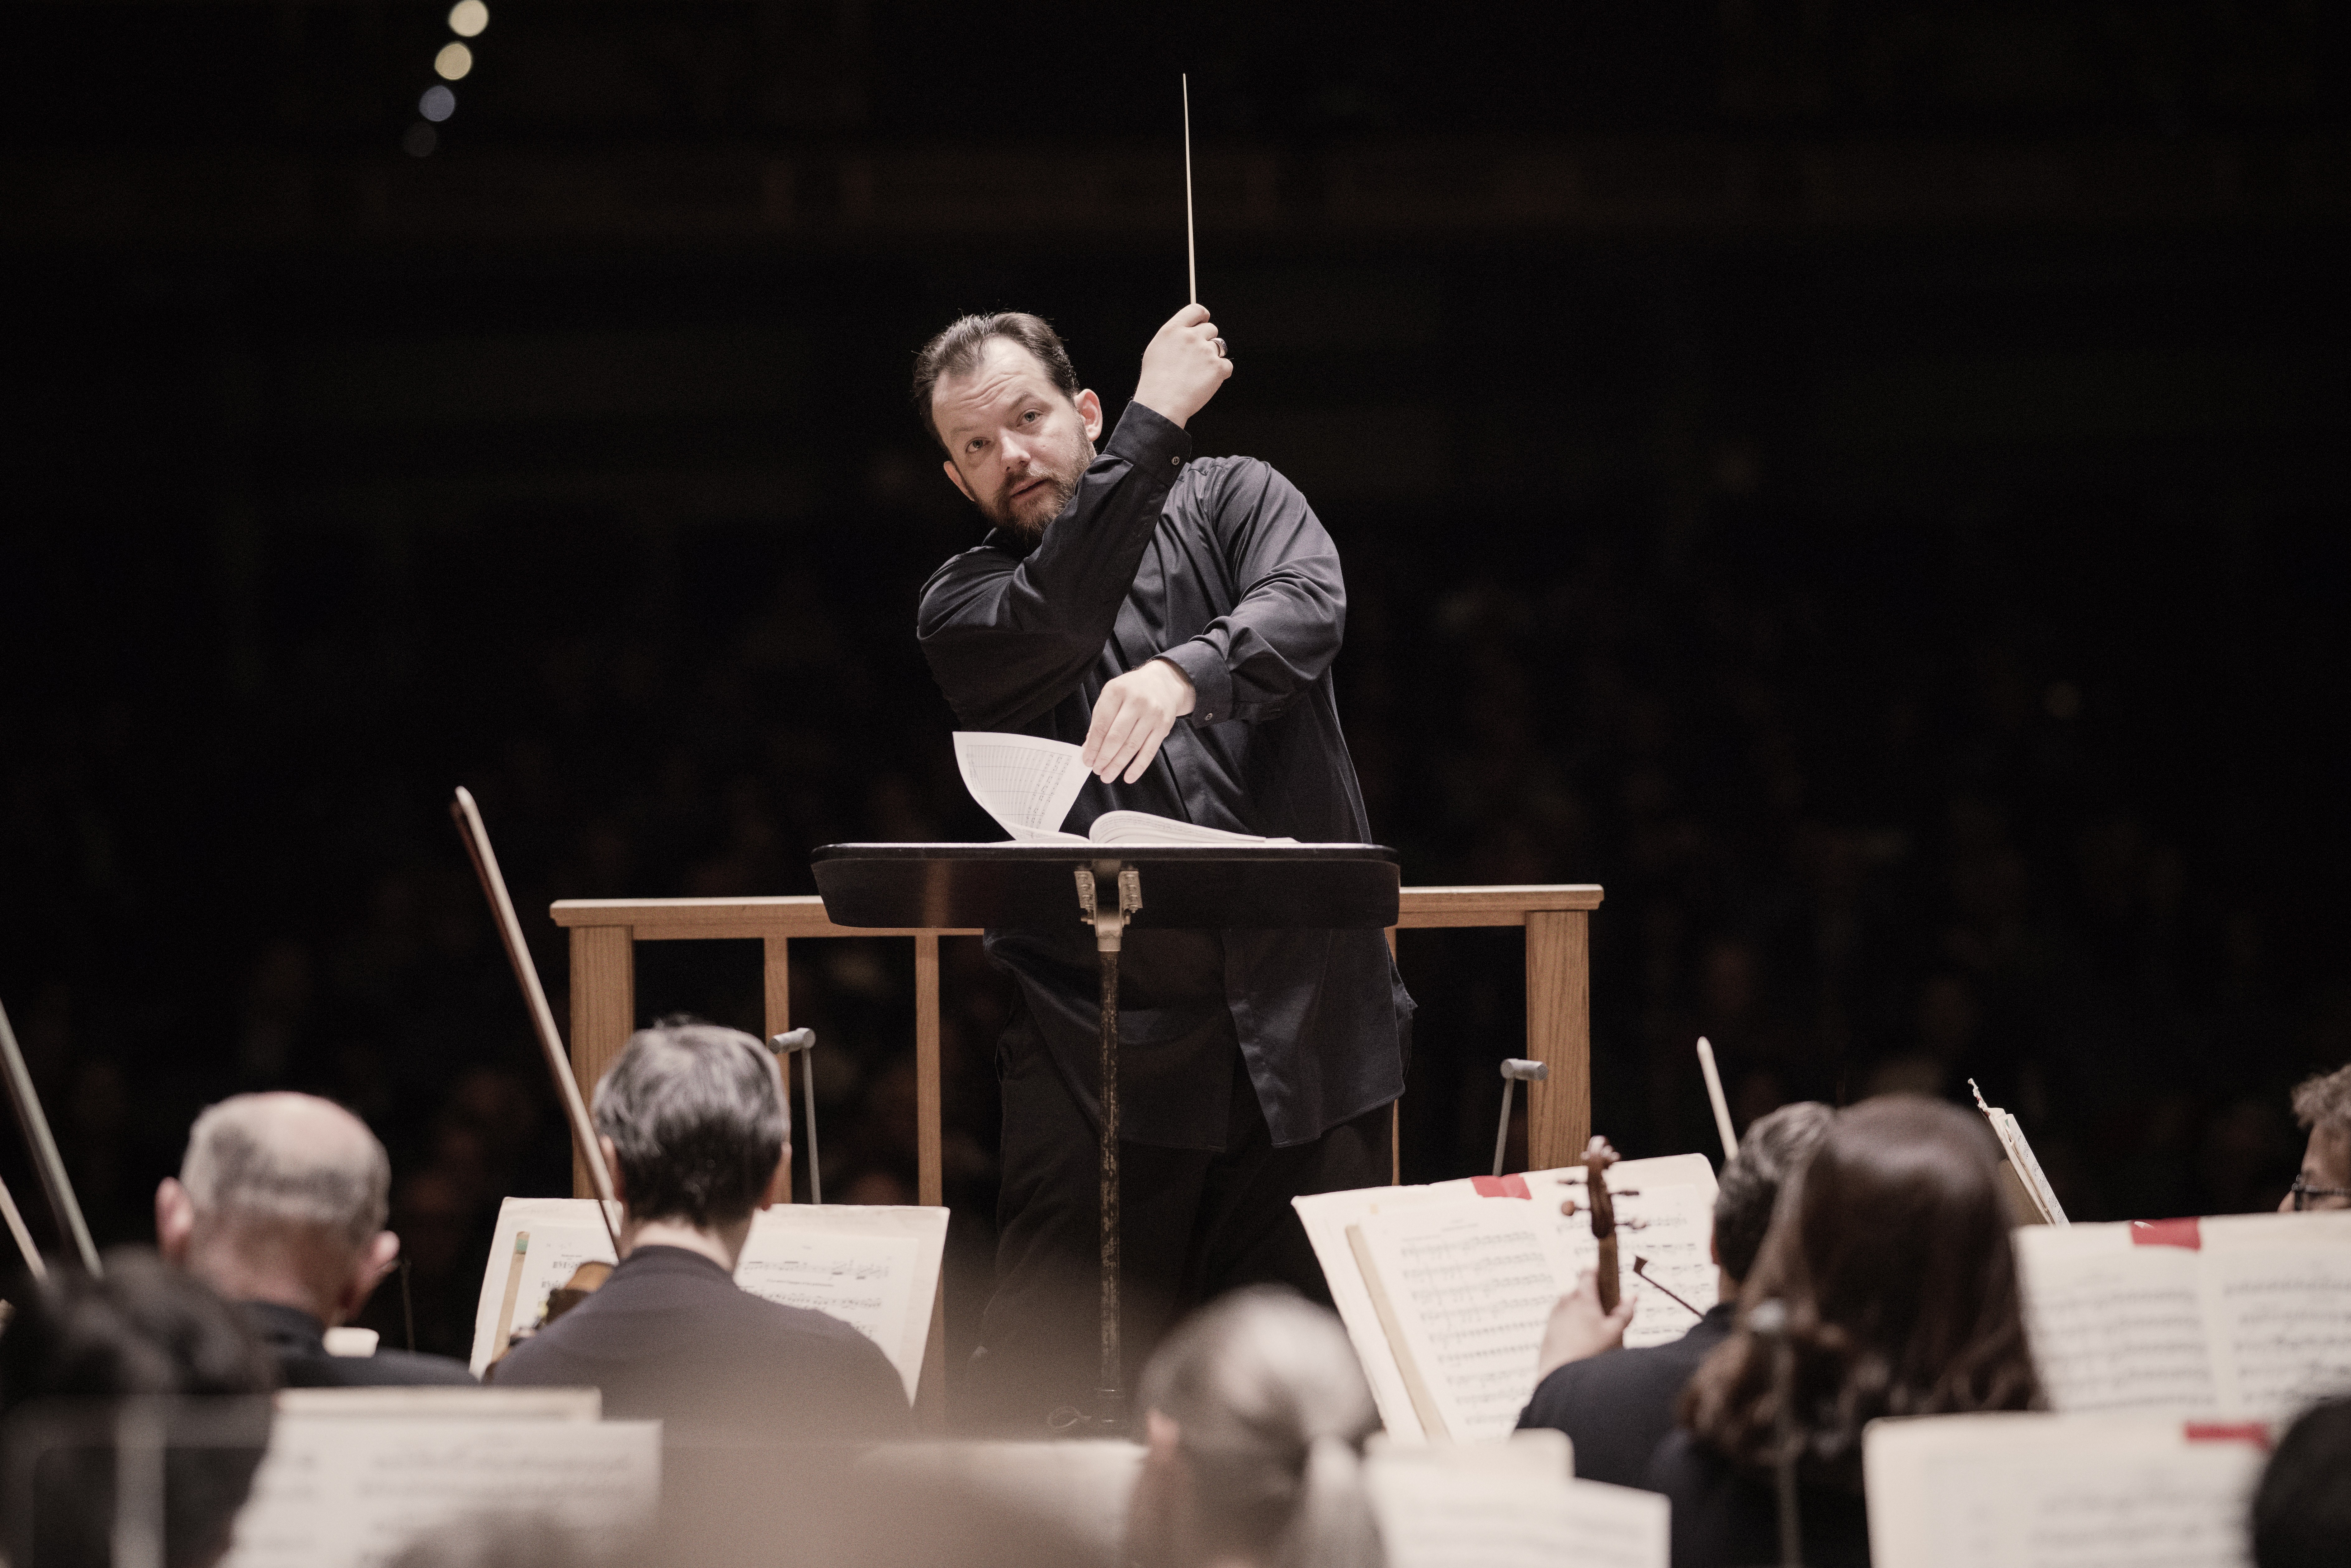 Andris Nelsons conducts the Boston Symphony Orchestra, which was to have given the opening concert of this year’s Hong Kong Arts Festival. The whole event, featuring more than 120 performances, has been cancelled because of the coronavirus outbreak. Photo: Marco Borggreve